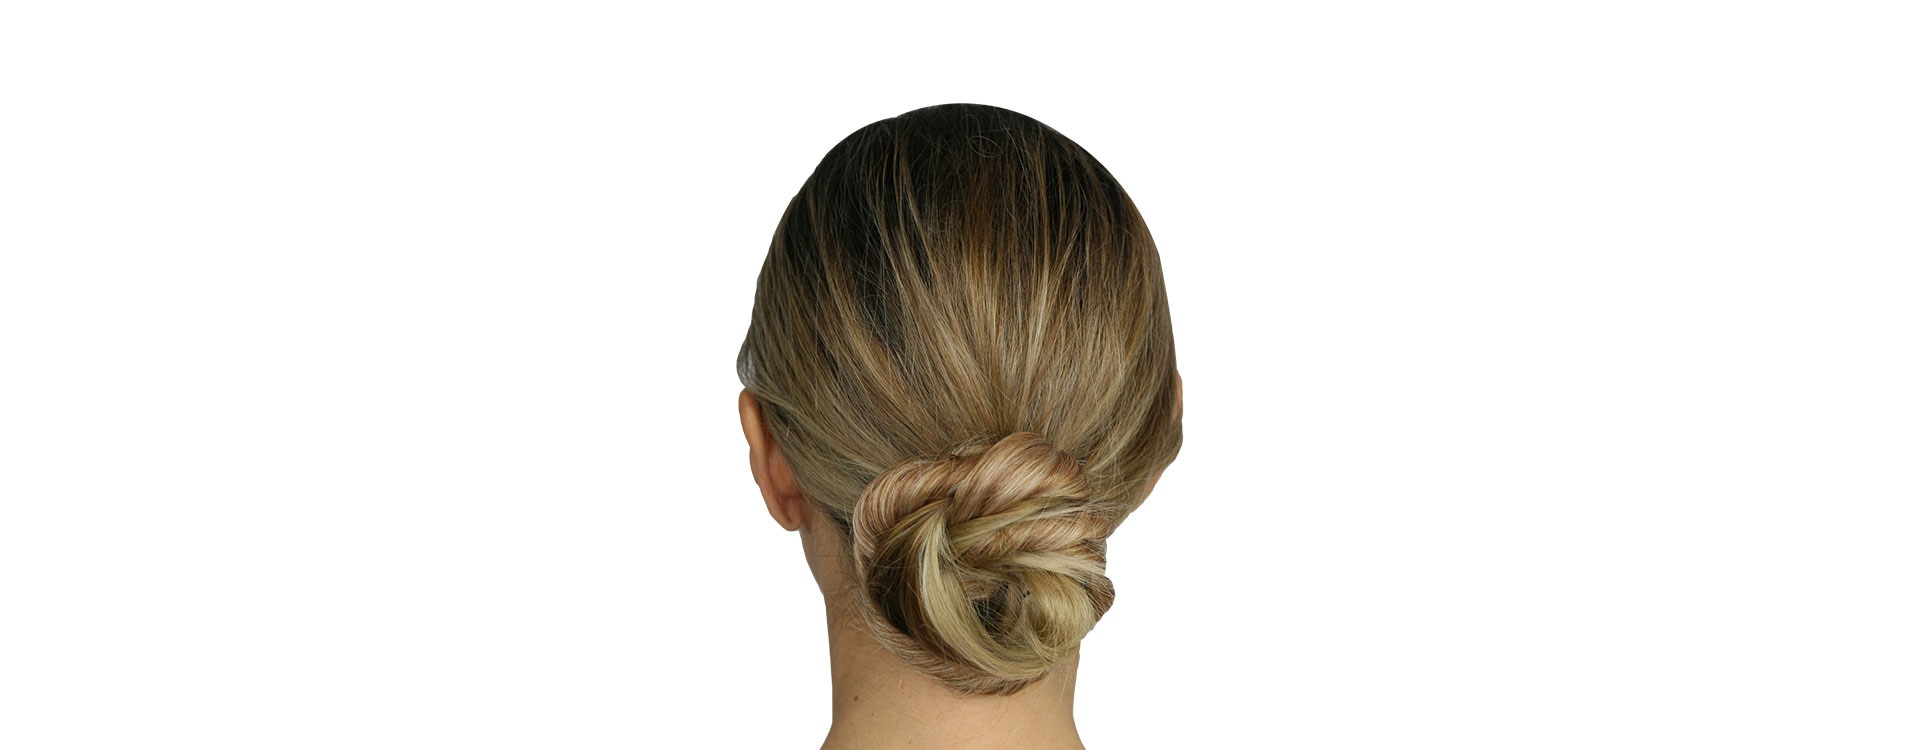 Woman with a Low Bun hair